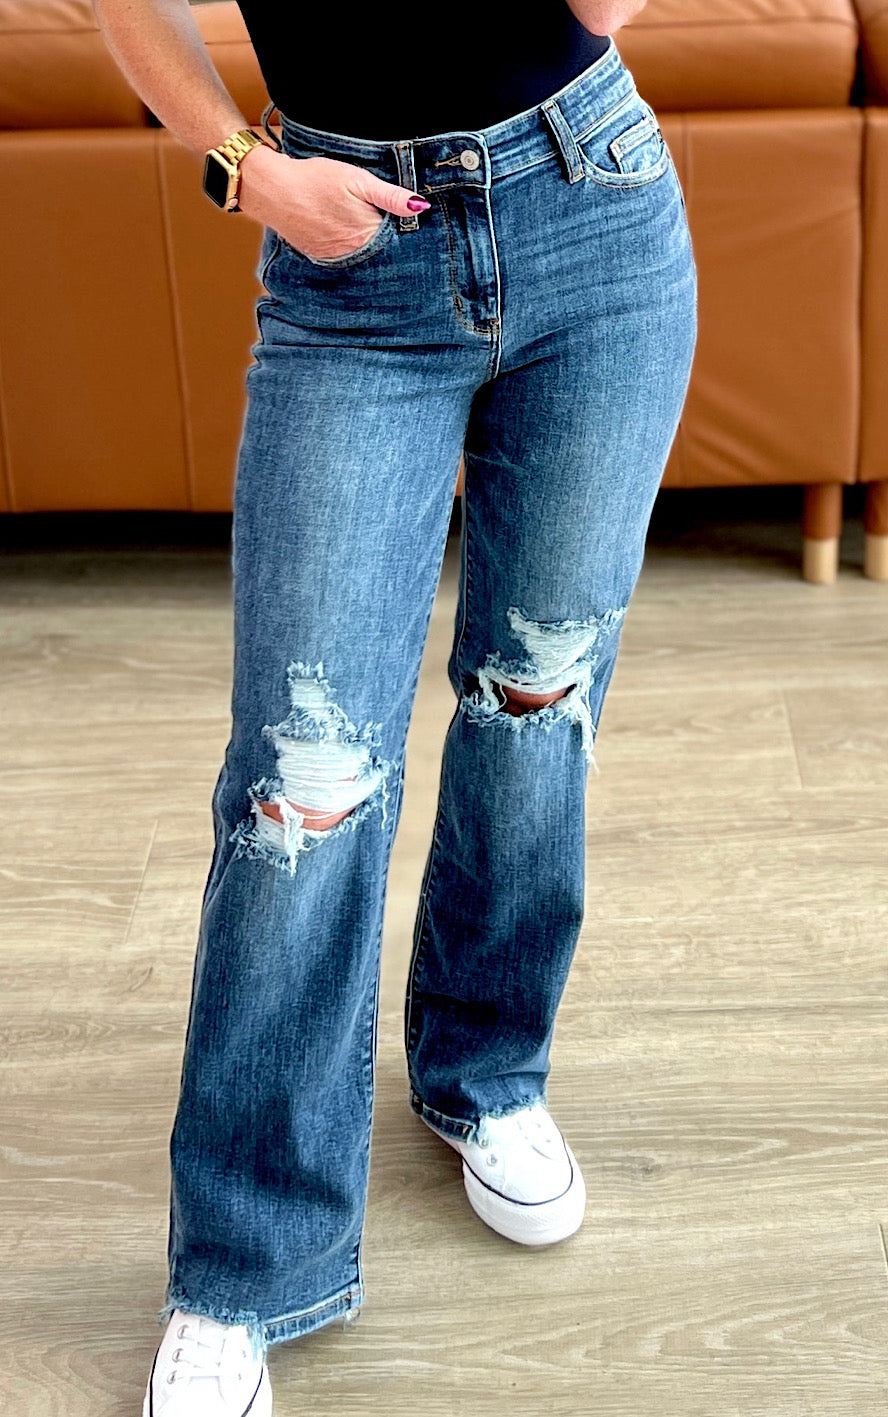 RESTOCKED! Casual Perfection Dark Wash Straight Leg Jeans by Judy Blue 0-24W